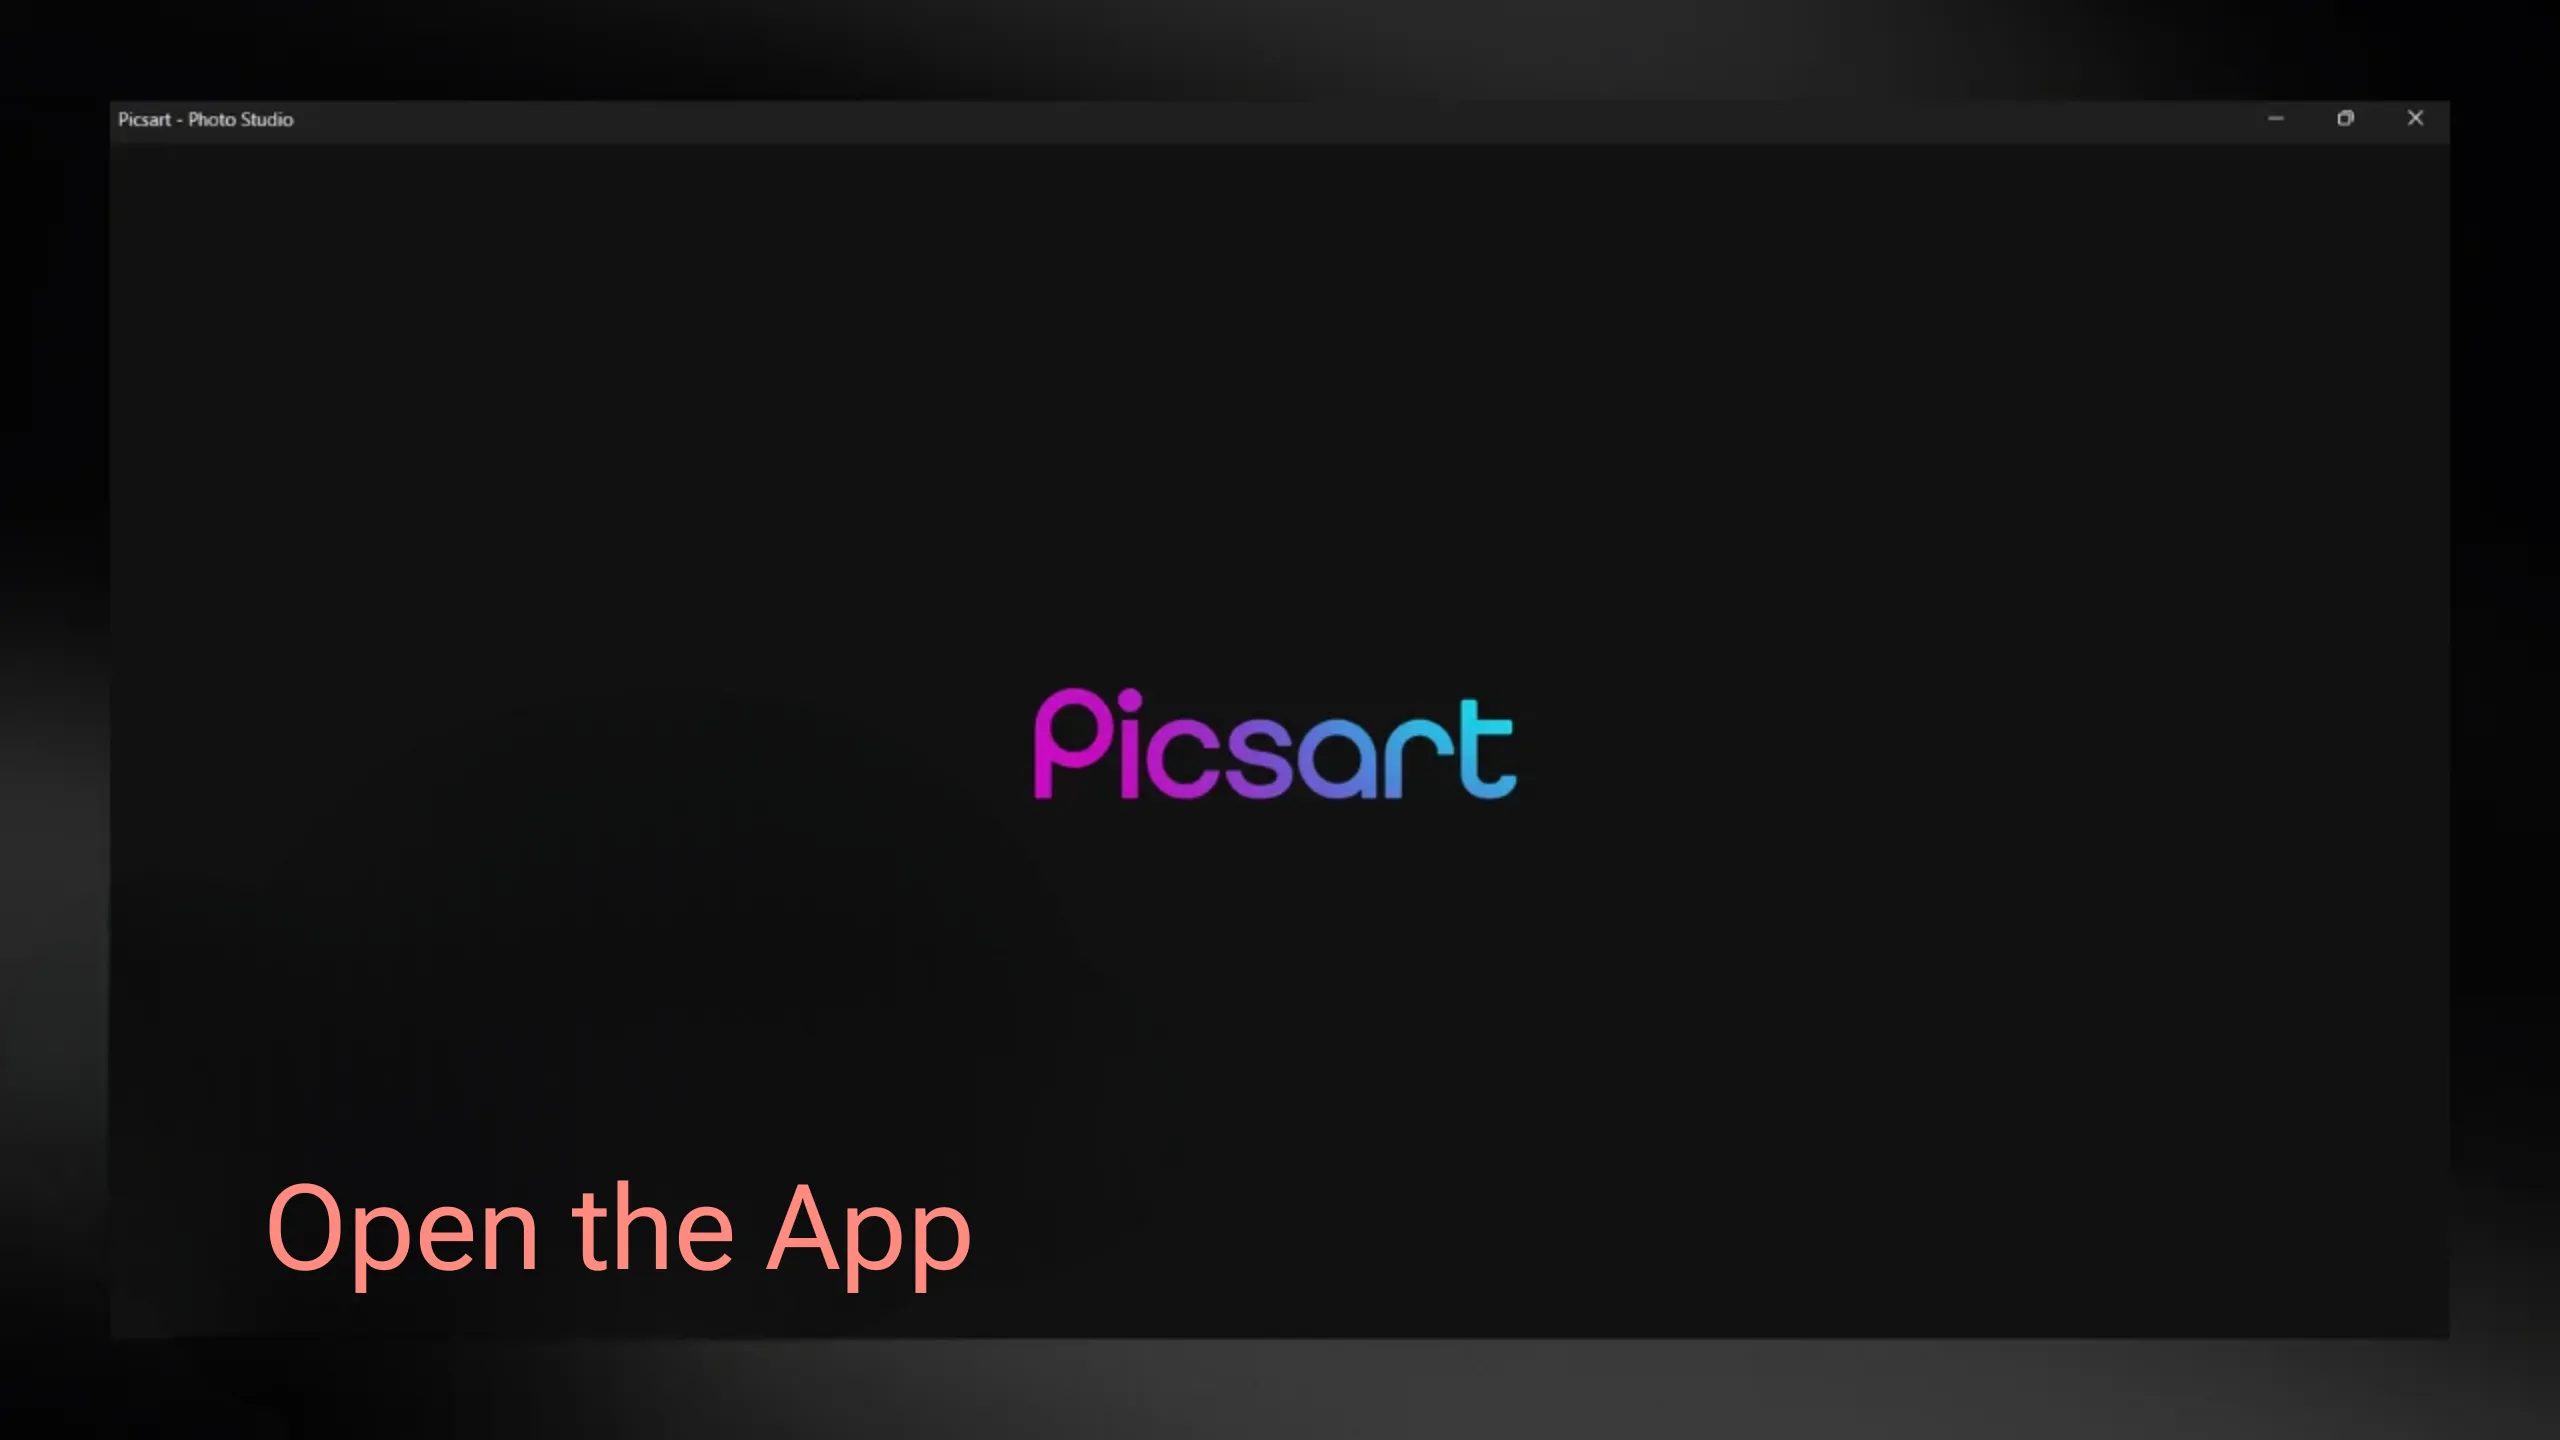 These images show how to search, locate, and download Picsart from the Microsoft Store for PC.